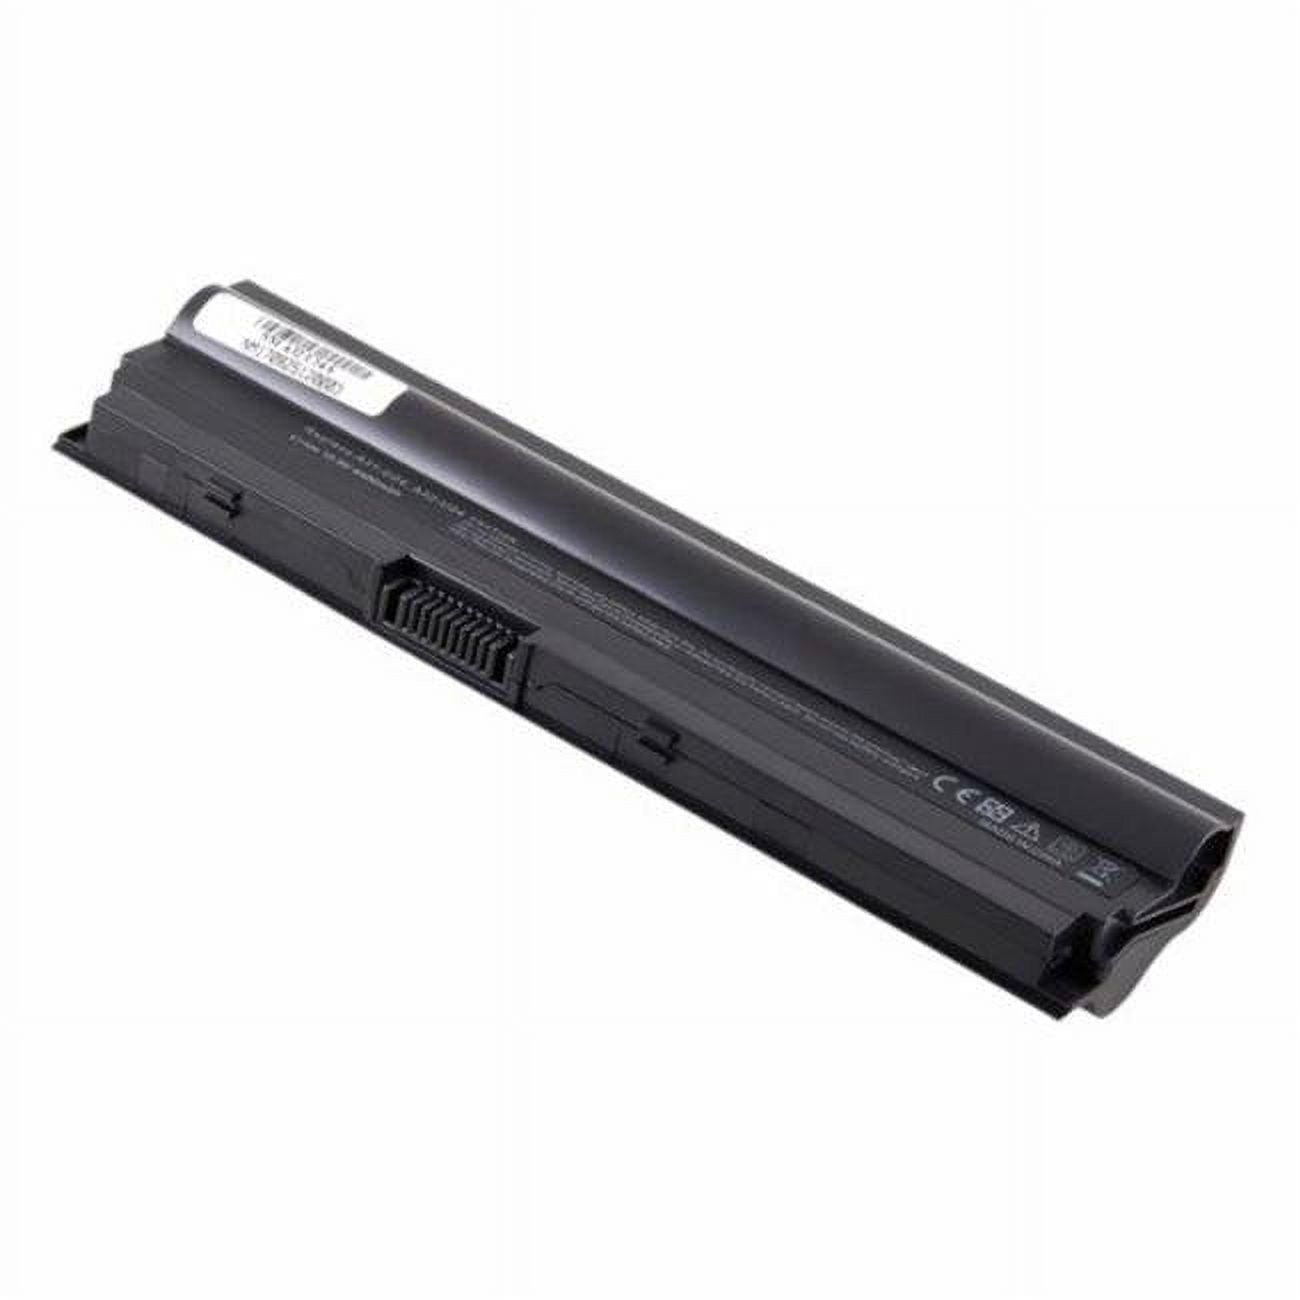 Picture of Denaq NM-A32-U24-6 10.8V 6-Cell Lithium-Ion Battery for Select ASUS Laptops